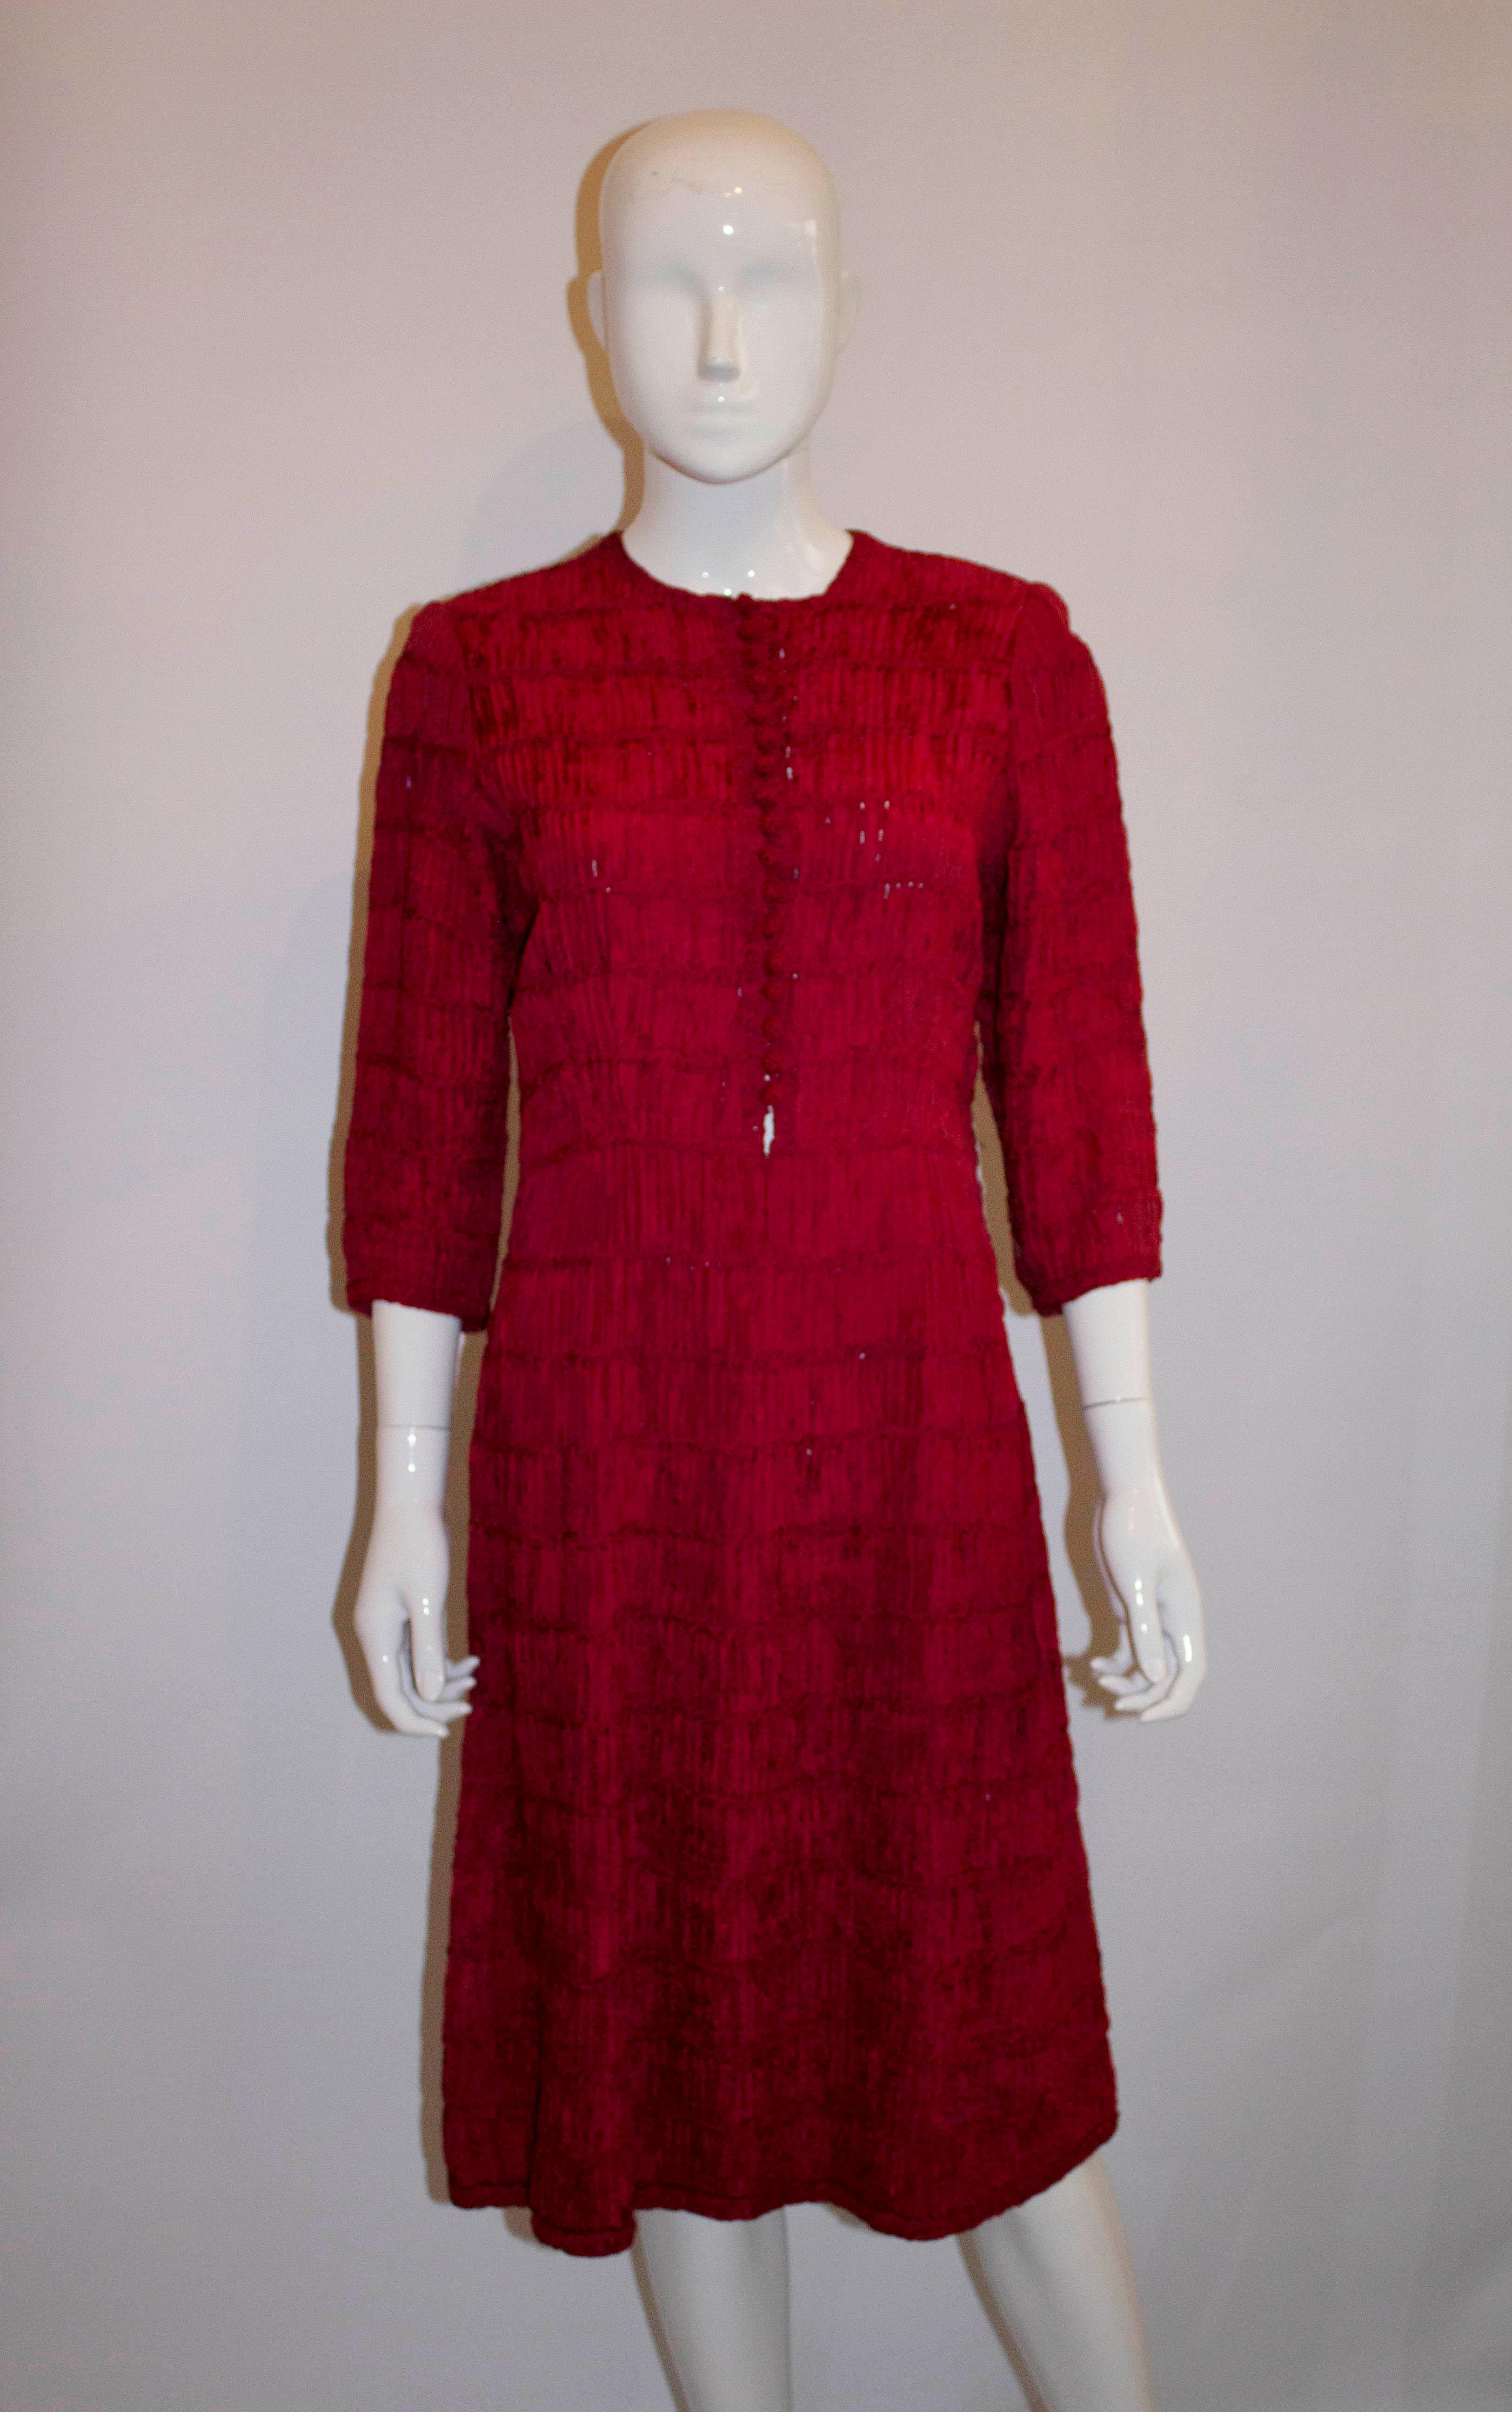 Women's Vintage Red Ribbonwork Dress by Glengyle For Sale